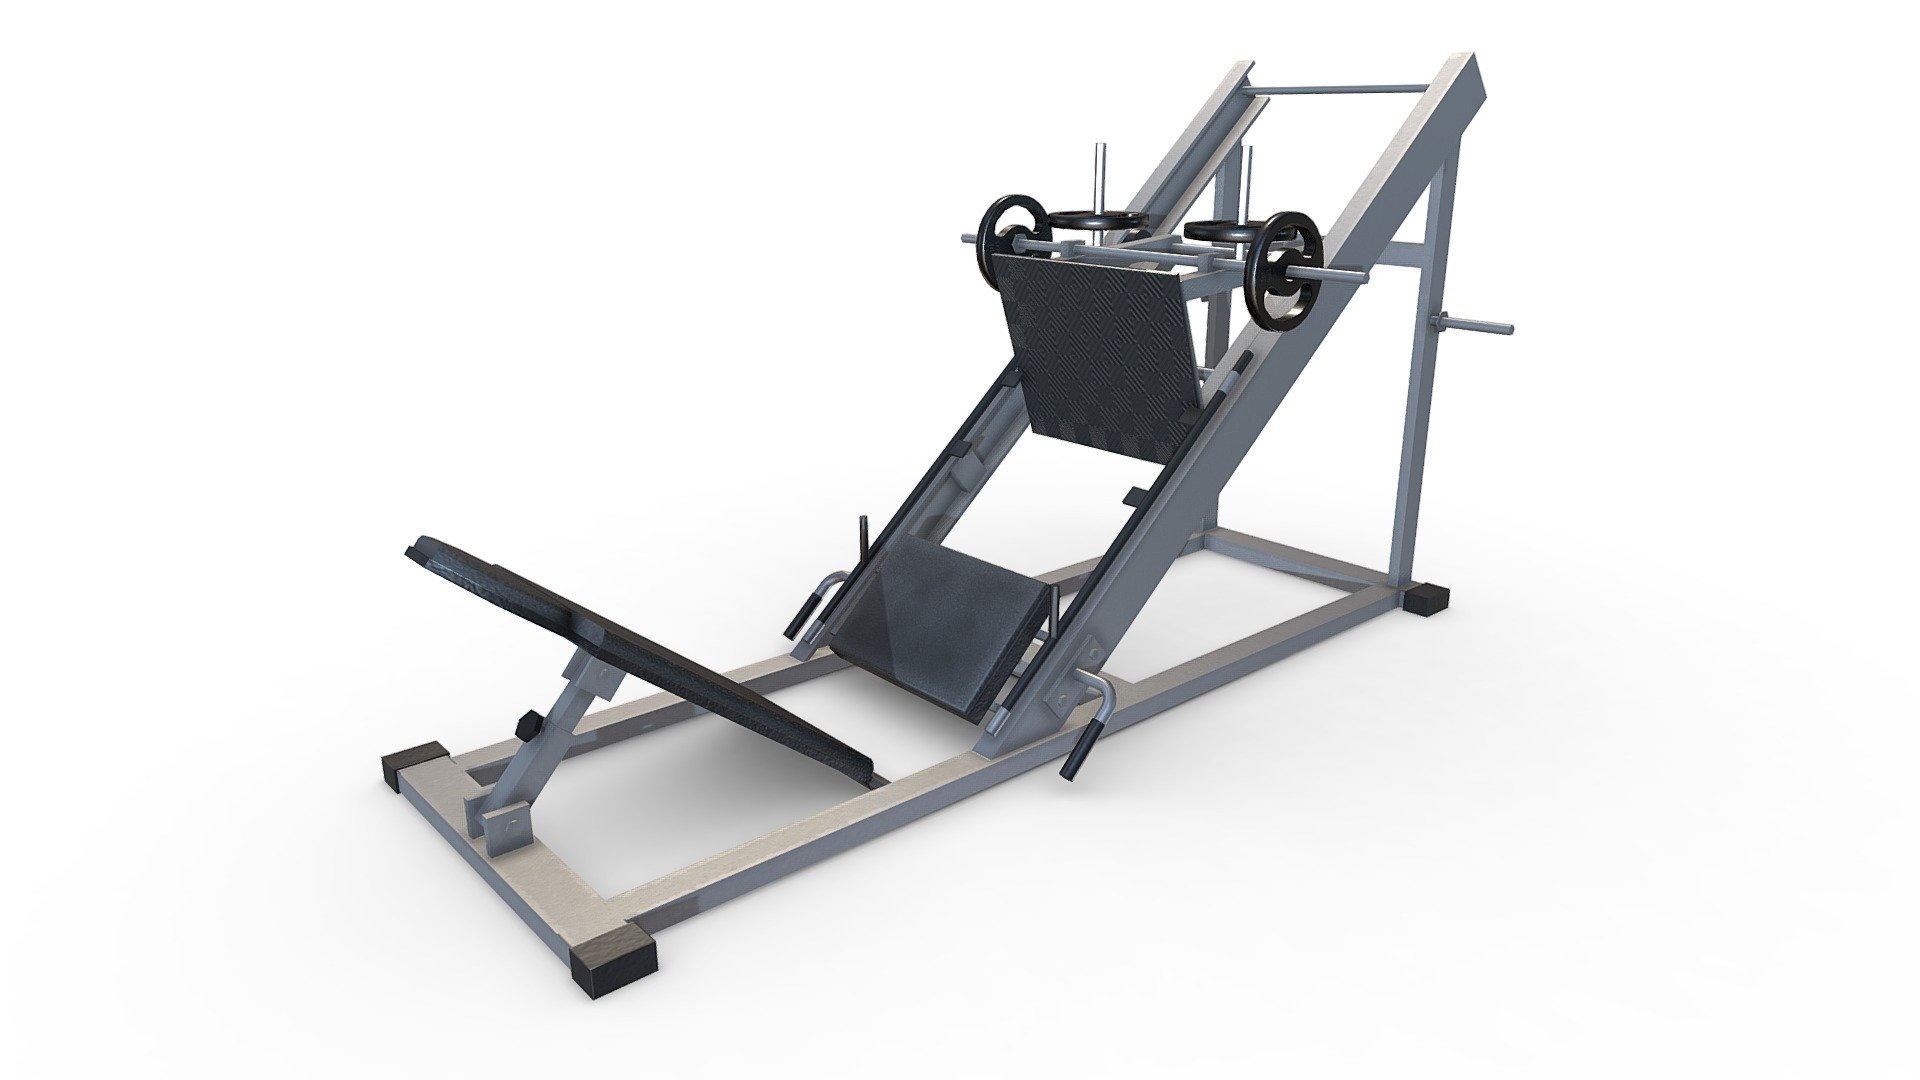 Features:


Low poly.
Ready for games.
Ready for animations.
Optimized.
Separated and nomed parts.
Easy to modify.
All textures includeds and materials applieds.
All formats tested and working.
Textures PBR 2048x2048.
 - Leg Press Machine - Buy Royalty Free 3D model by Elvair Lima (@elvair) 3d model